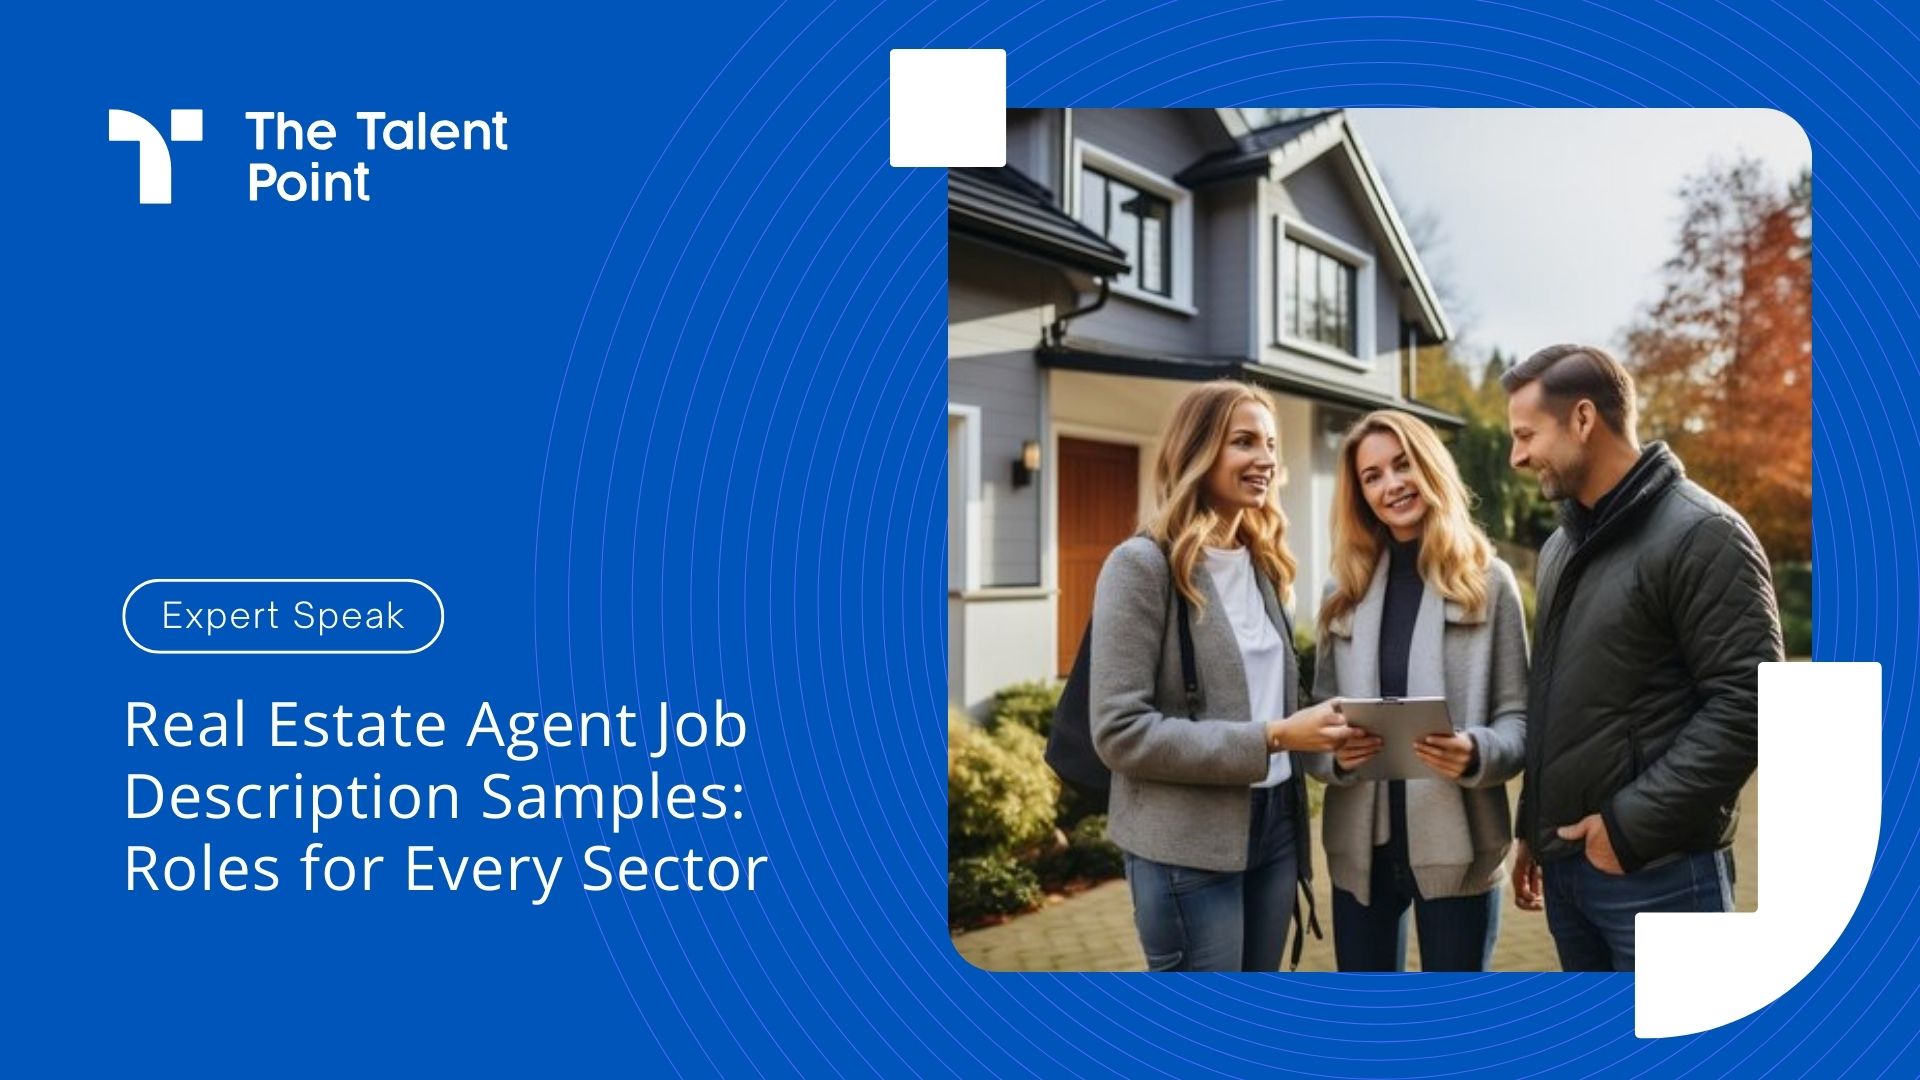 Real Estate Agent Job Description Samples: Roles for Every Sector - TalentPoint